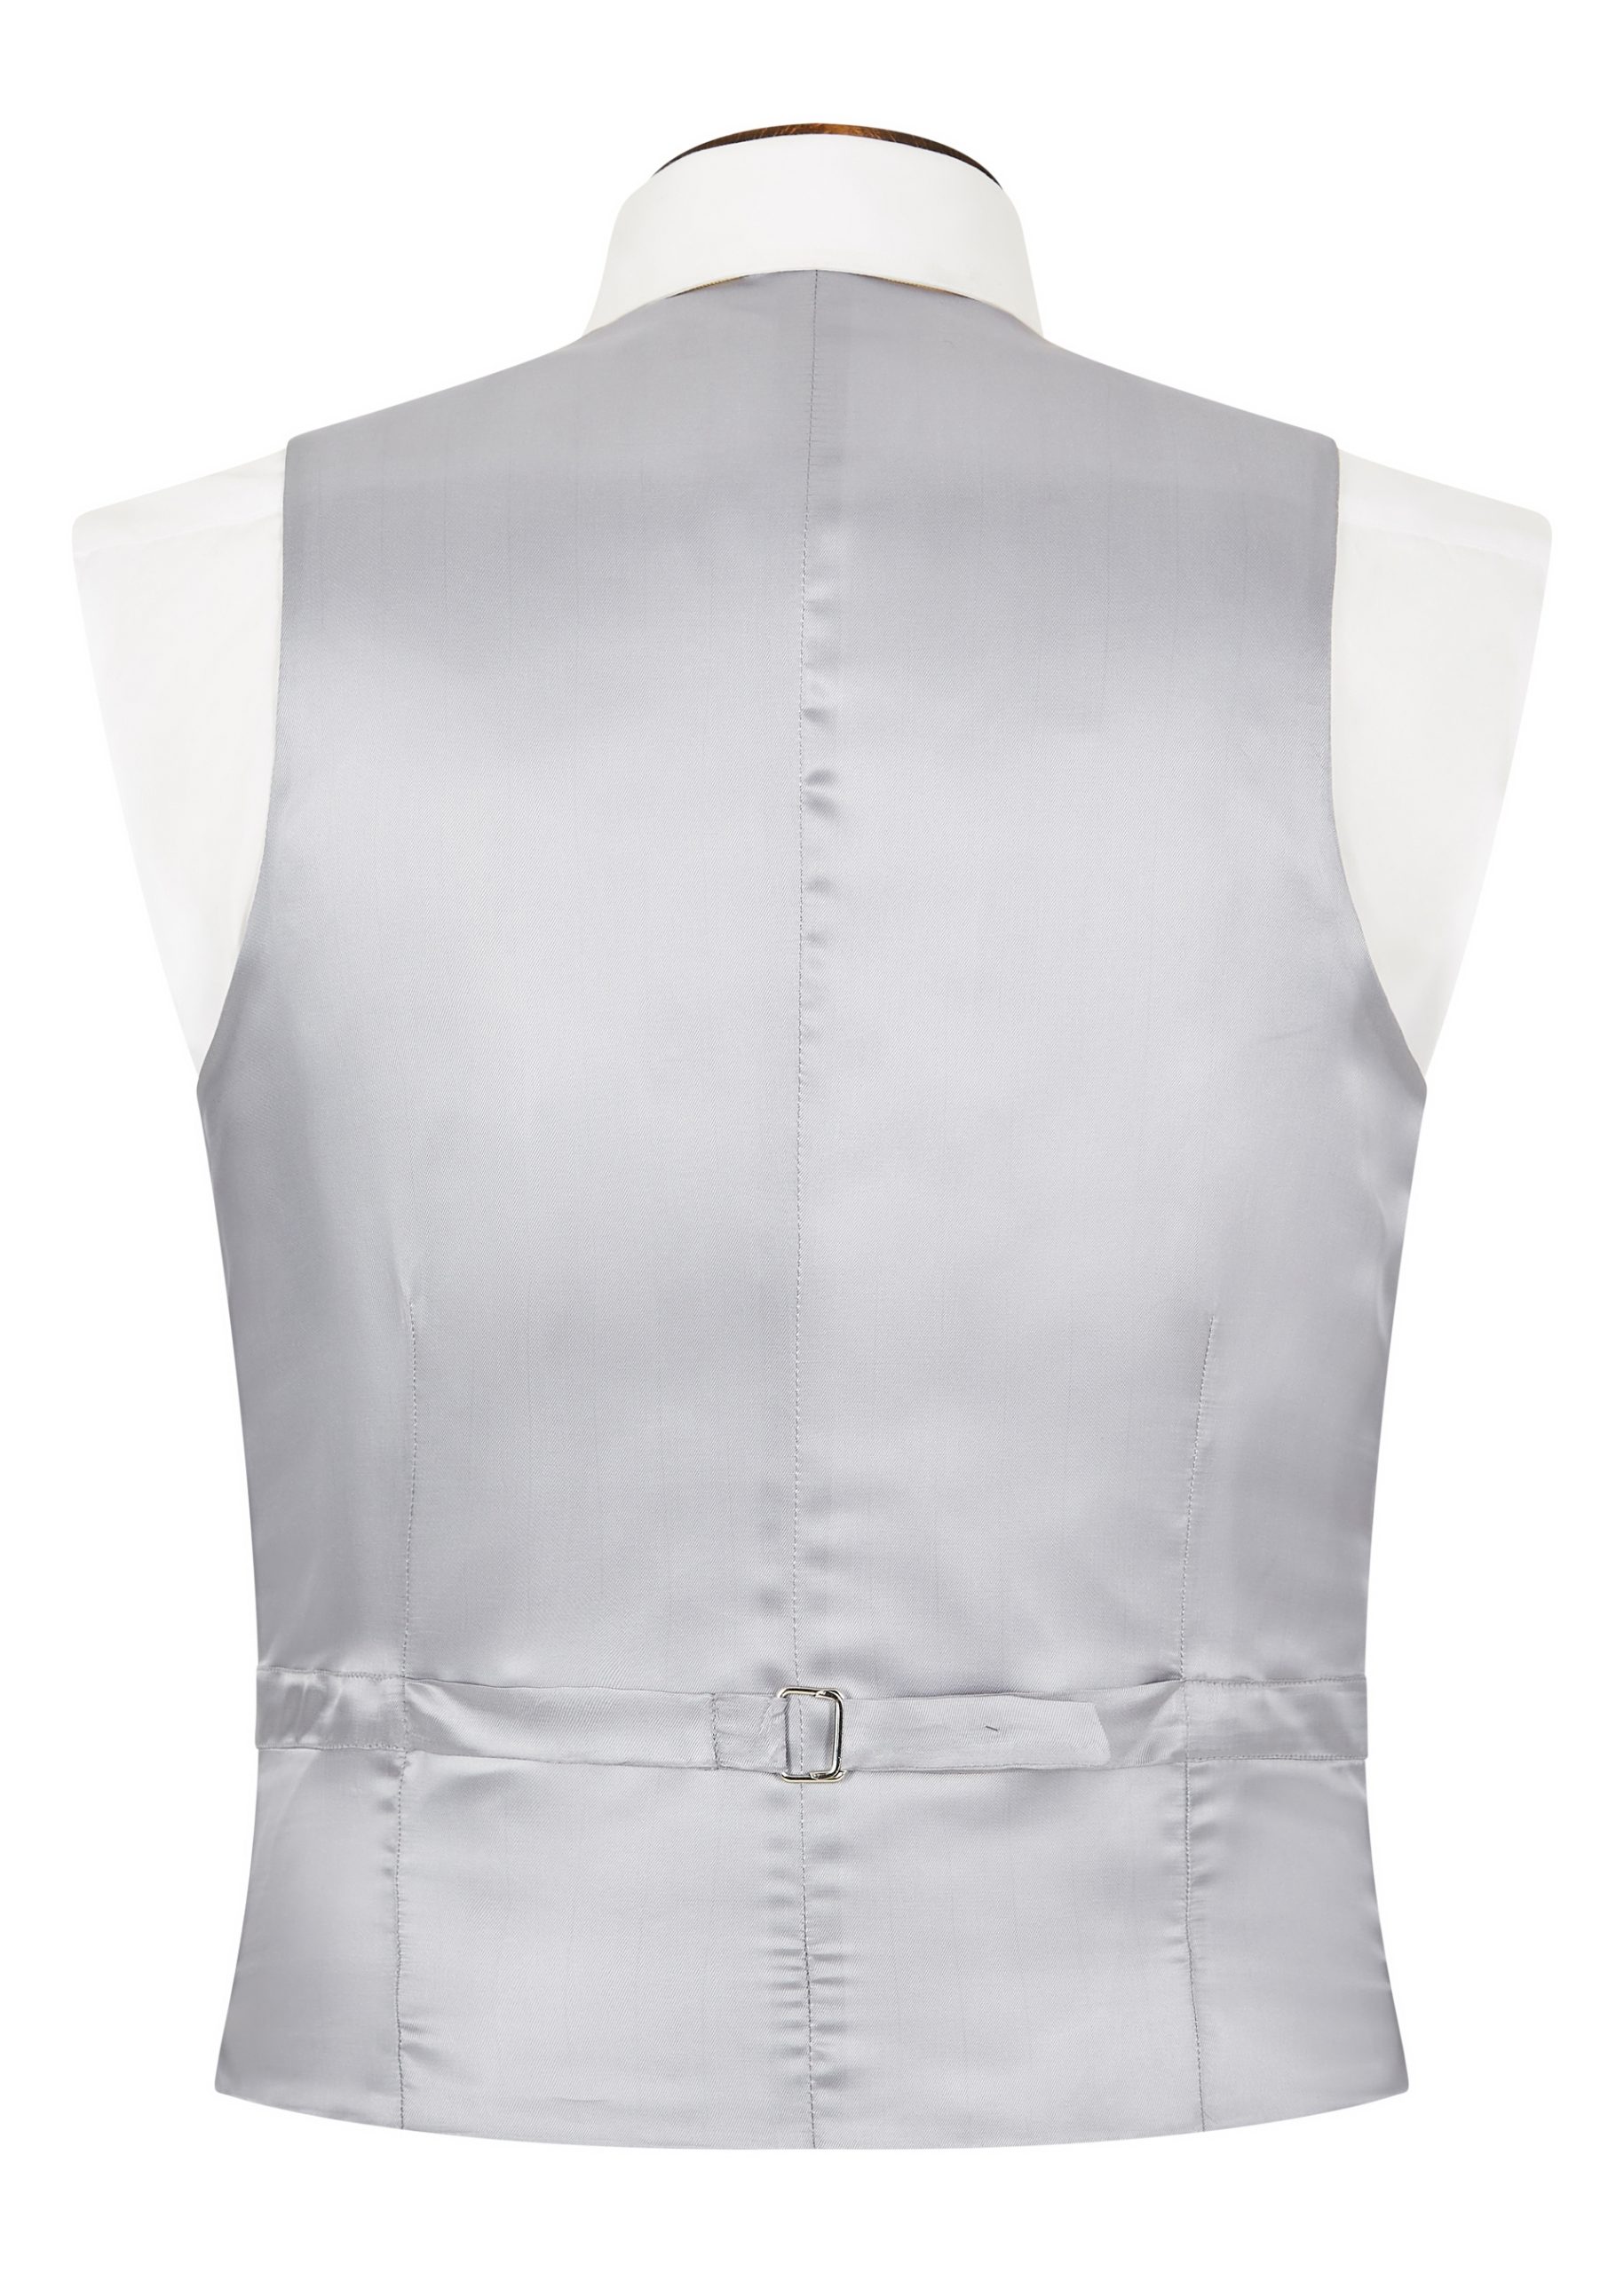 Roderick Charles grey formal waistcoat with six buttoned front